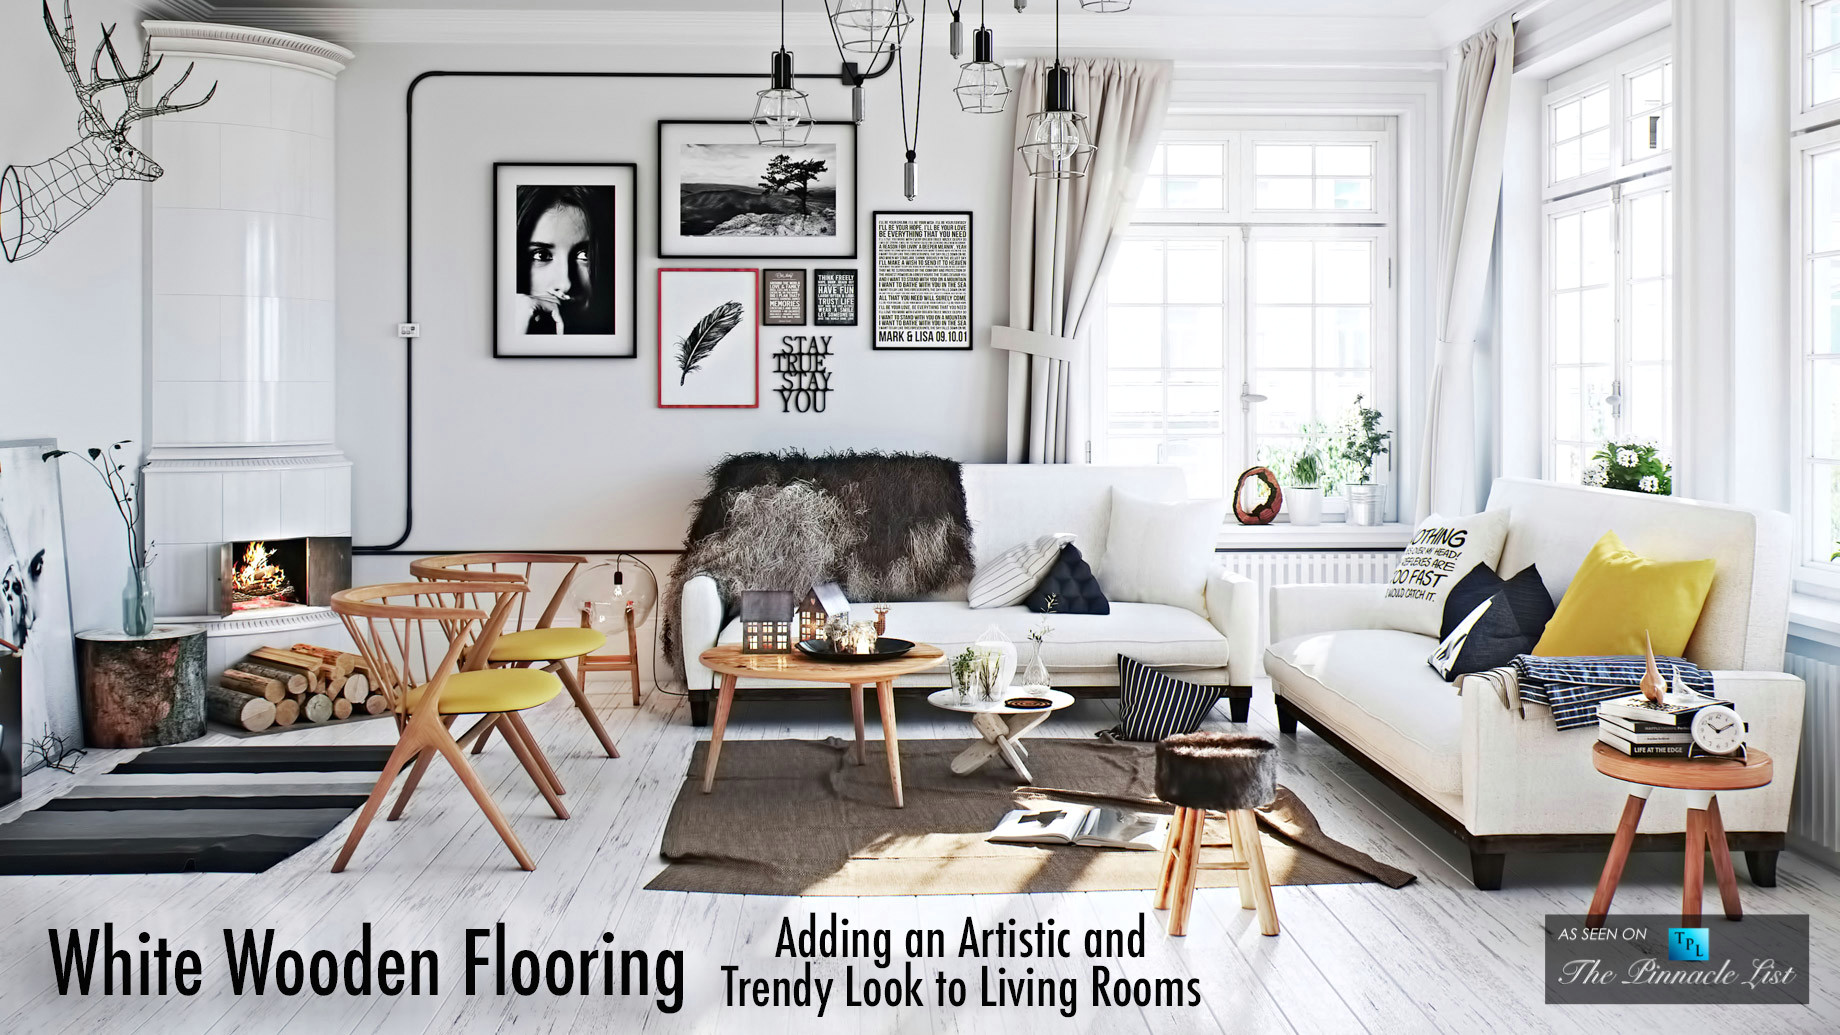 Drawing Room Things List White Wooden Flooring Adding An Artistic and Trendy Look to Living